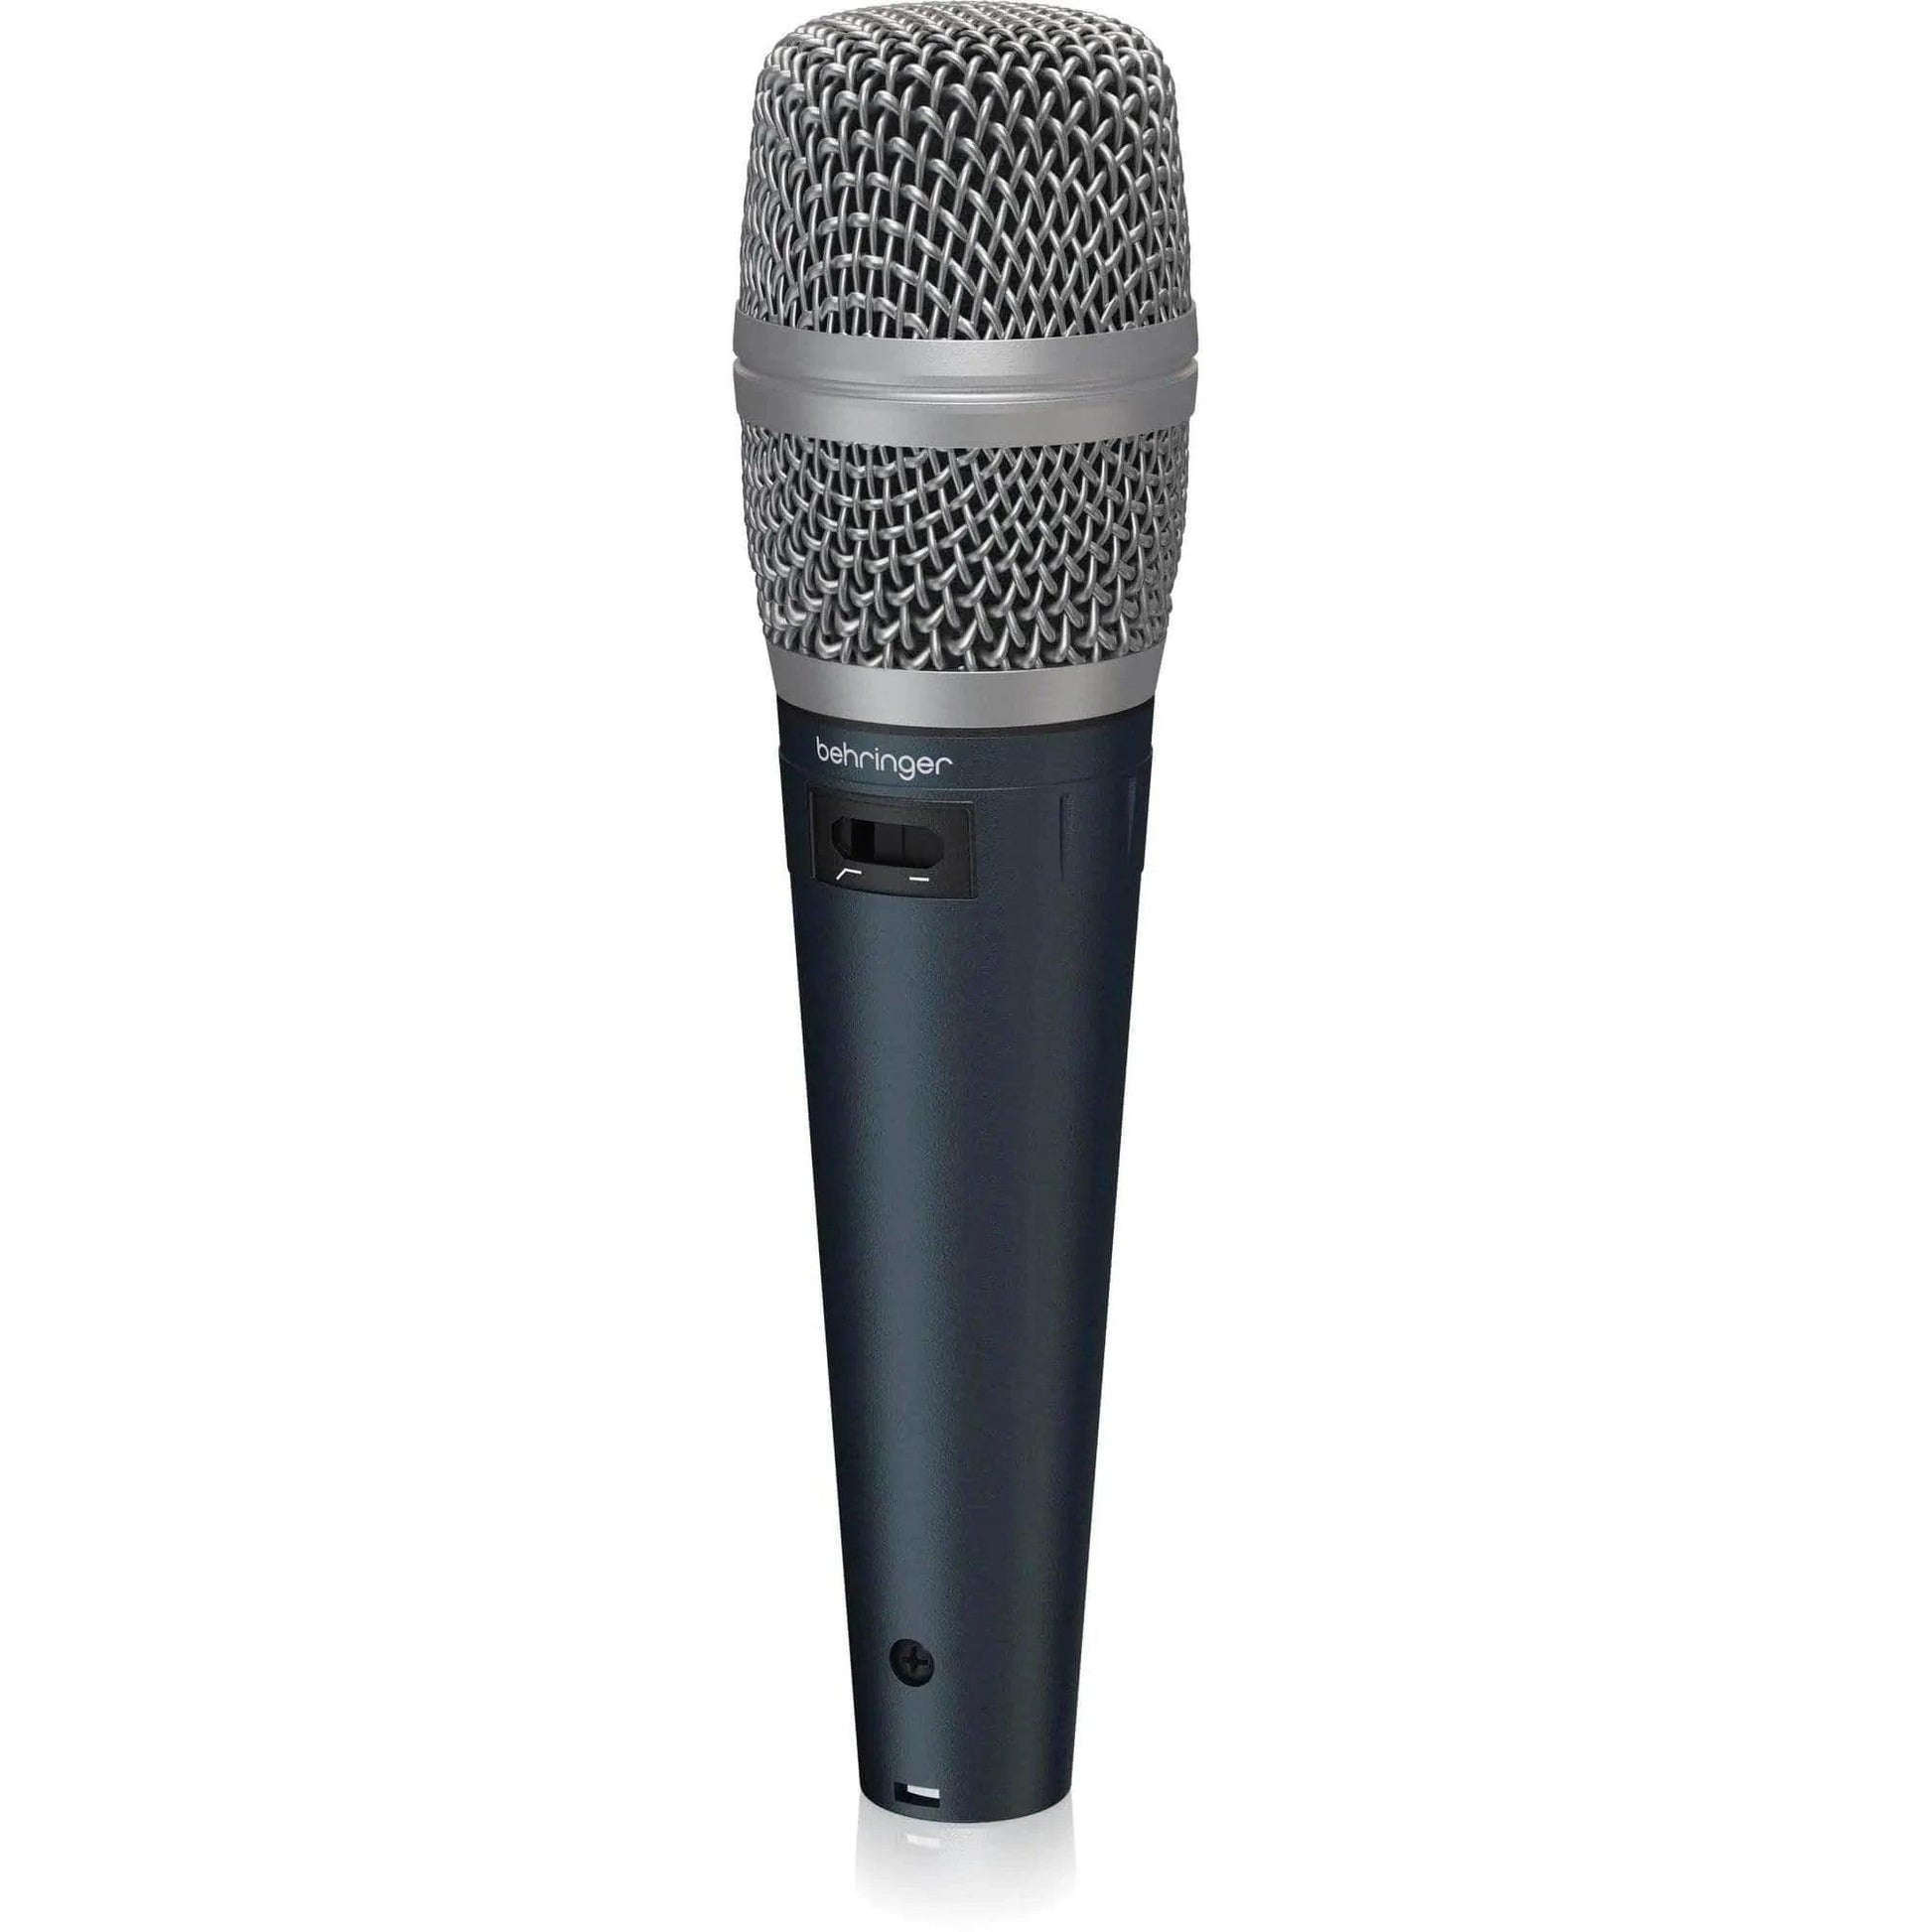 Behringer SB78A Cardioid Condenser Microphone